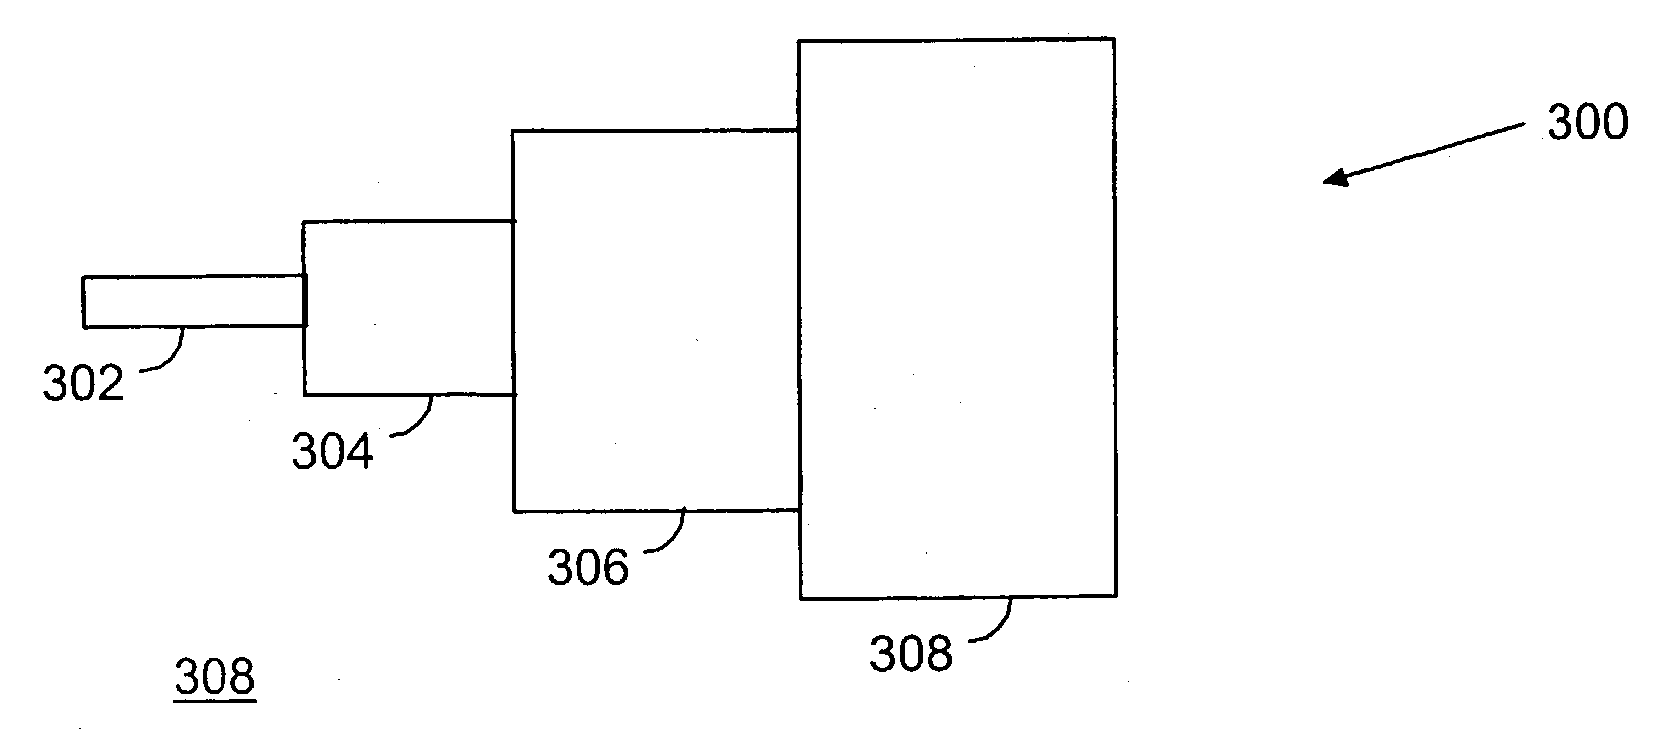 Coaxial cable and a manufacturing method